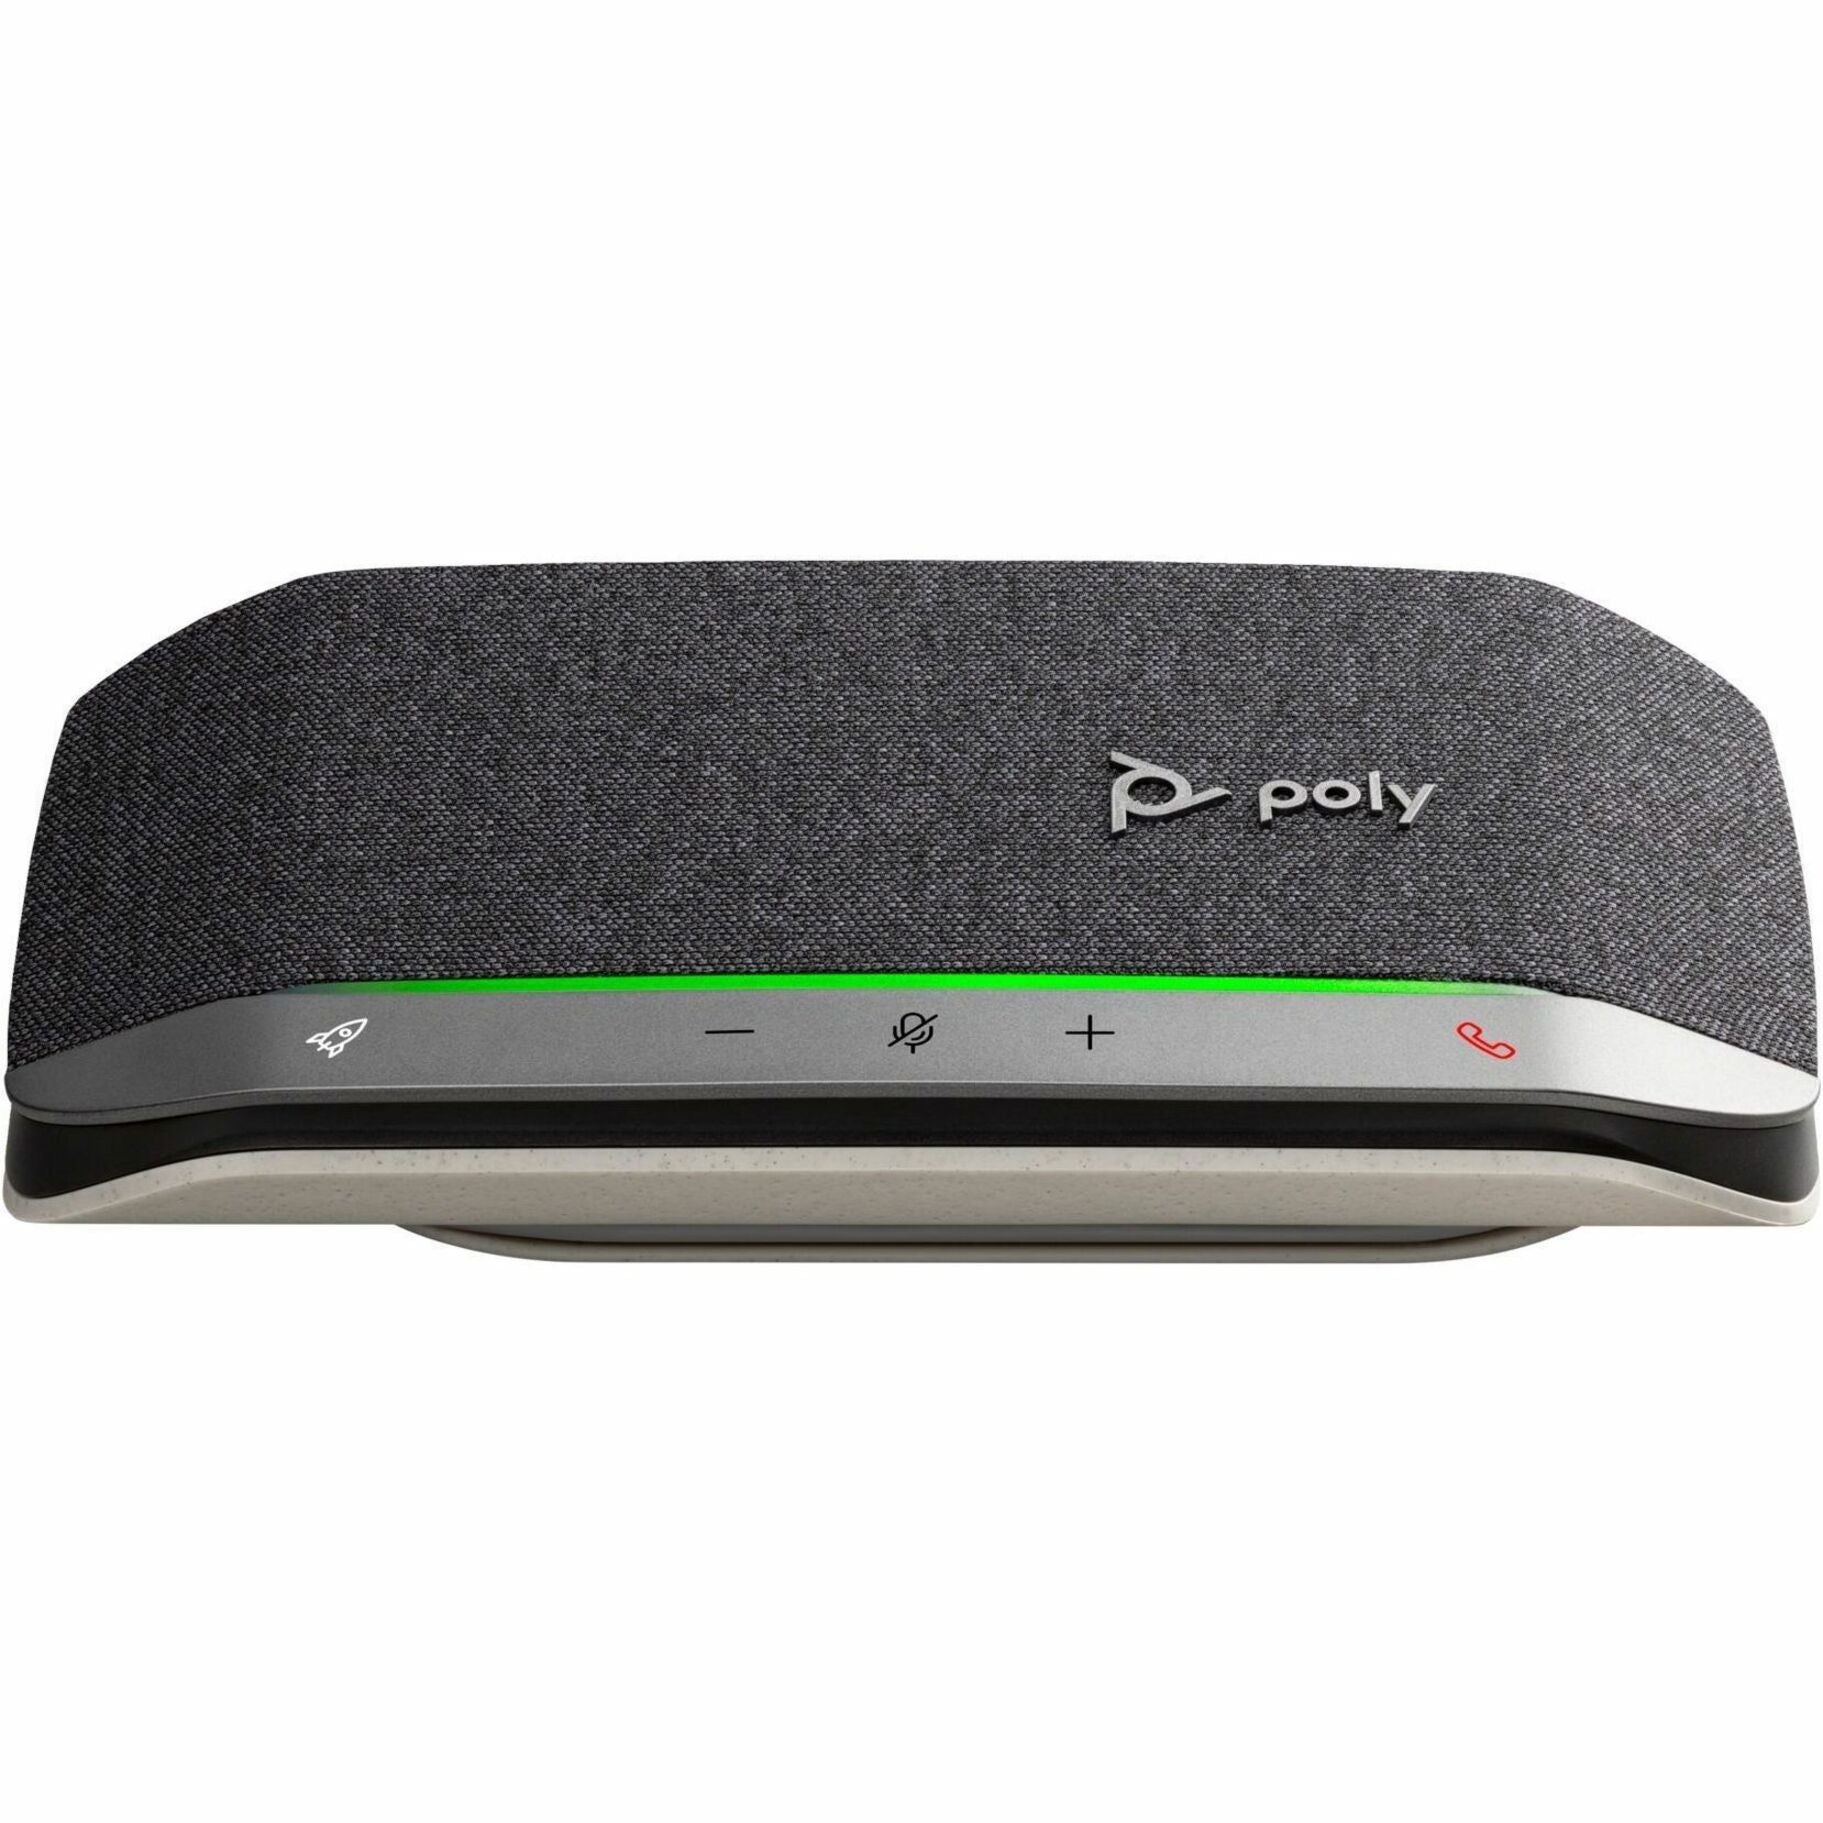 Poly 7F0J7AA Sync 20 USB-C Speakerphone, Portable Conference Speaker with Mute, Rechargeable Battery, and Bluetooth